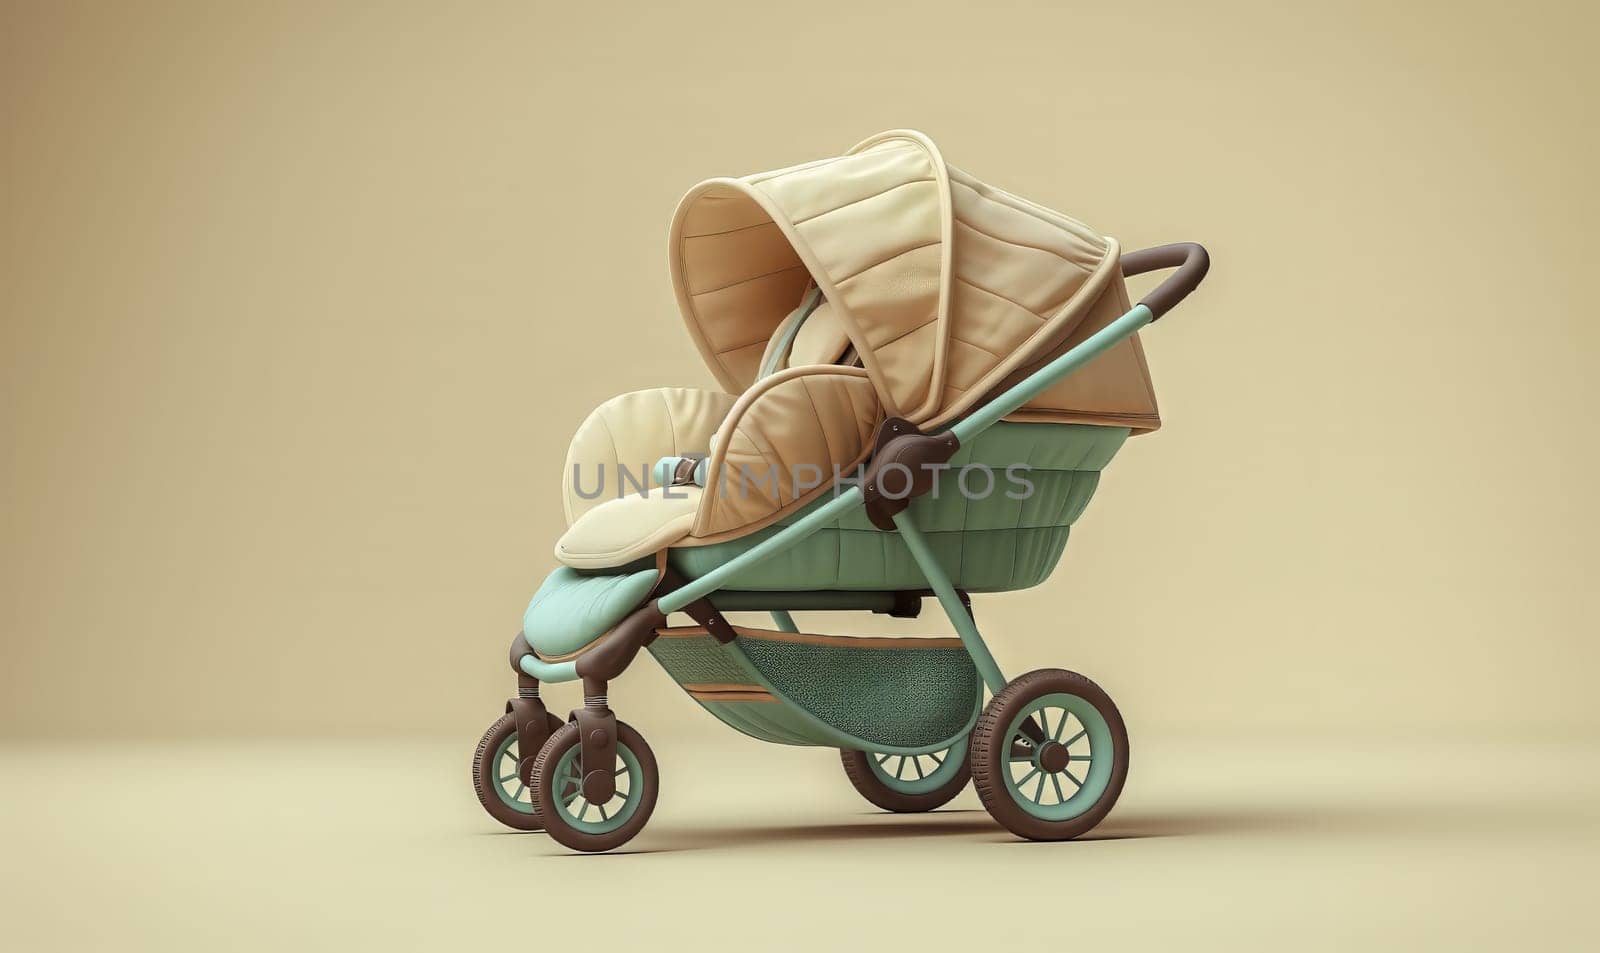 Image of a baby stroller on a light background. by Fischeron